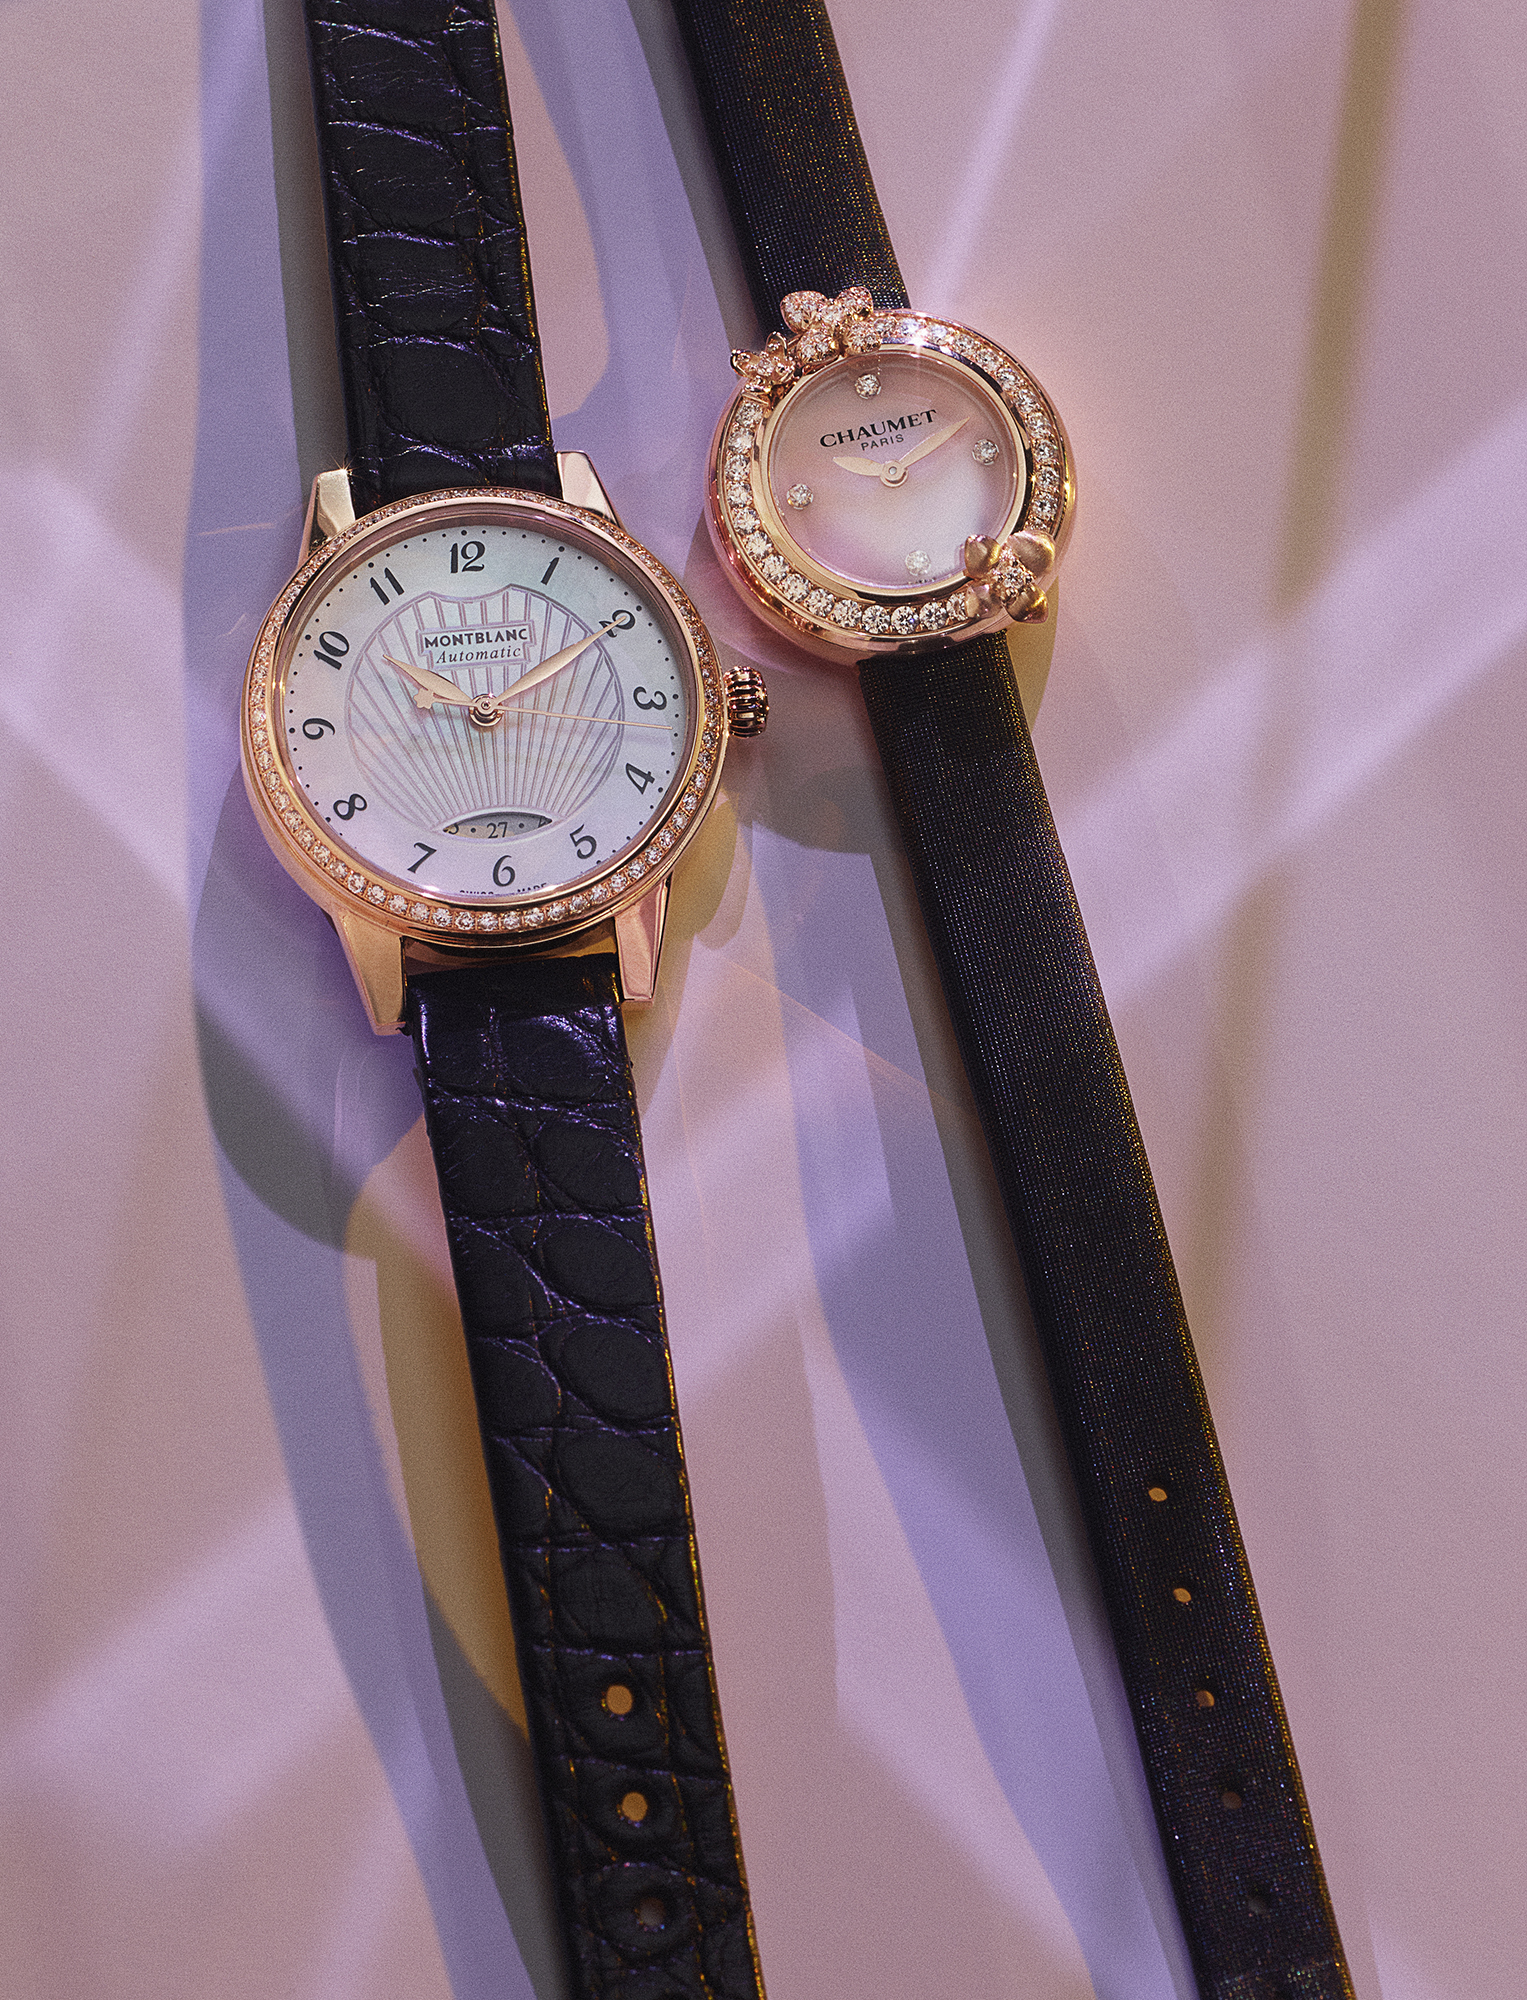 Bohéme Date Automatic 28mm, £7,600, MONTBLANC; Hortensia Eden in pink gold and diamonds with mother-of-pearl dial on black satin strap, £9,370, CHAUMET